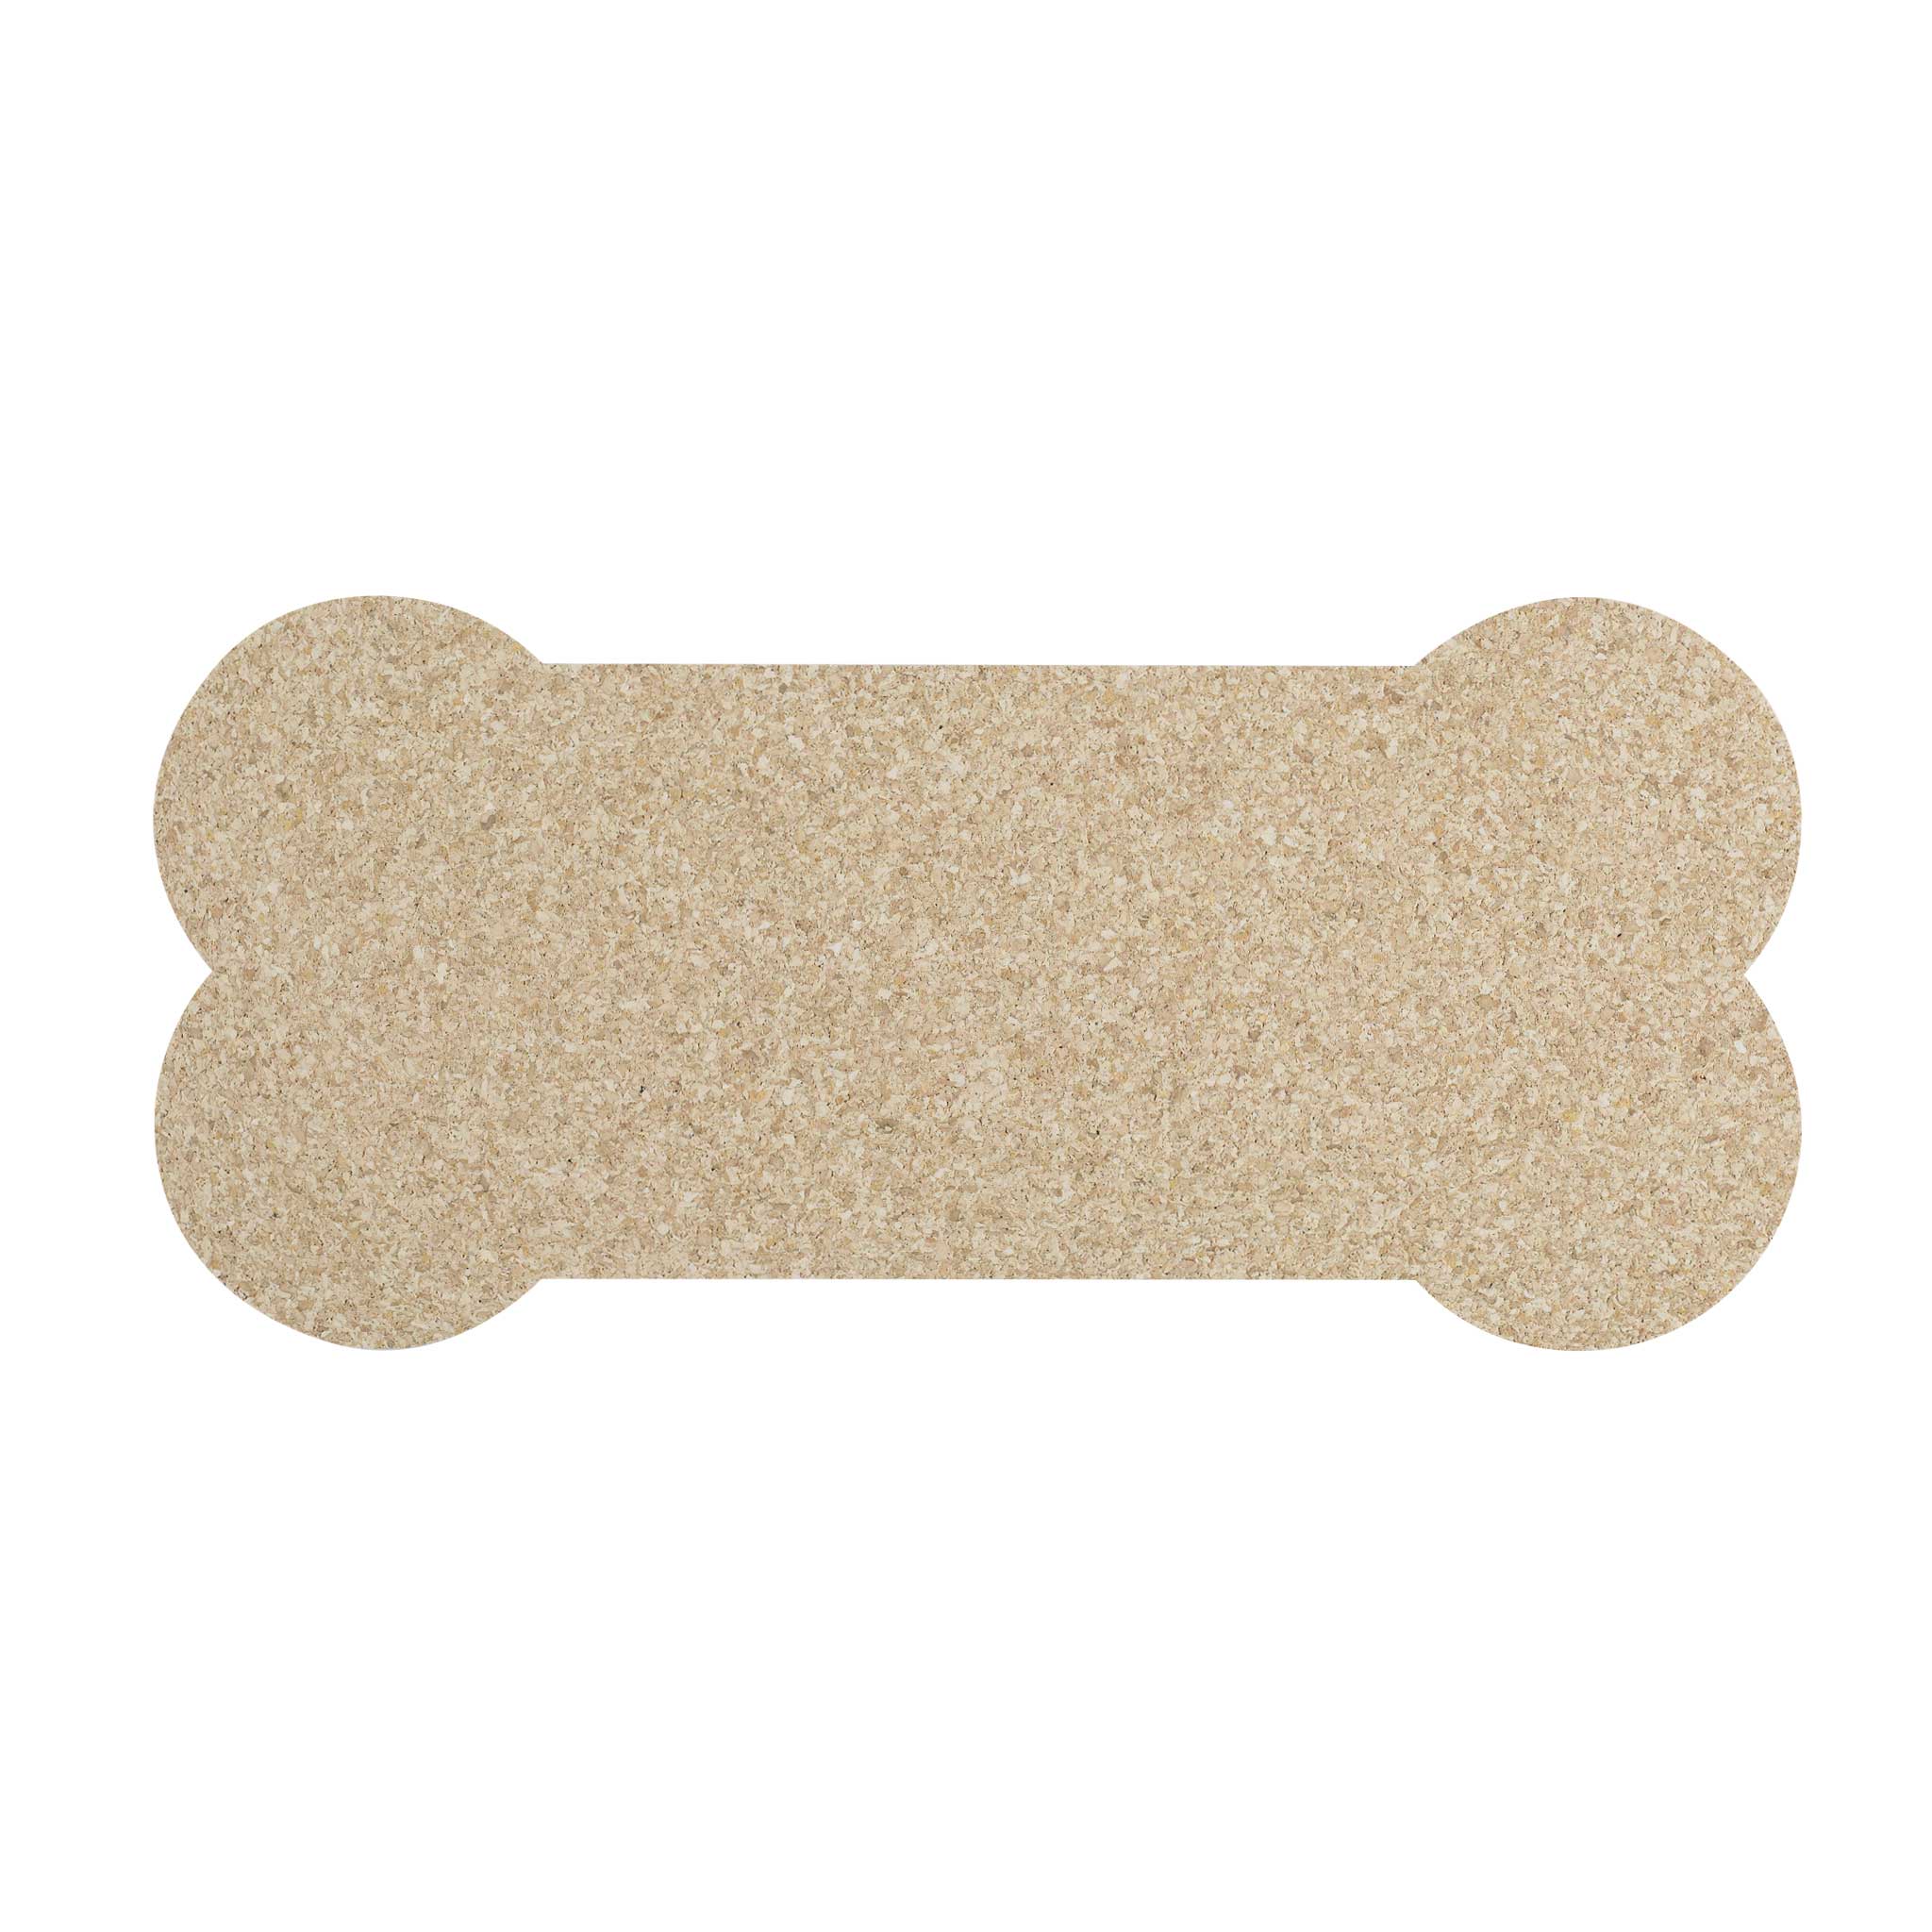 Ore’ Pet Placemat Recycled Rubber Skinny Bone Natural - Paw Naturals